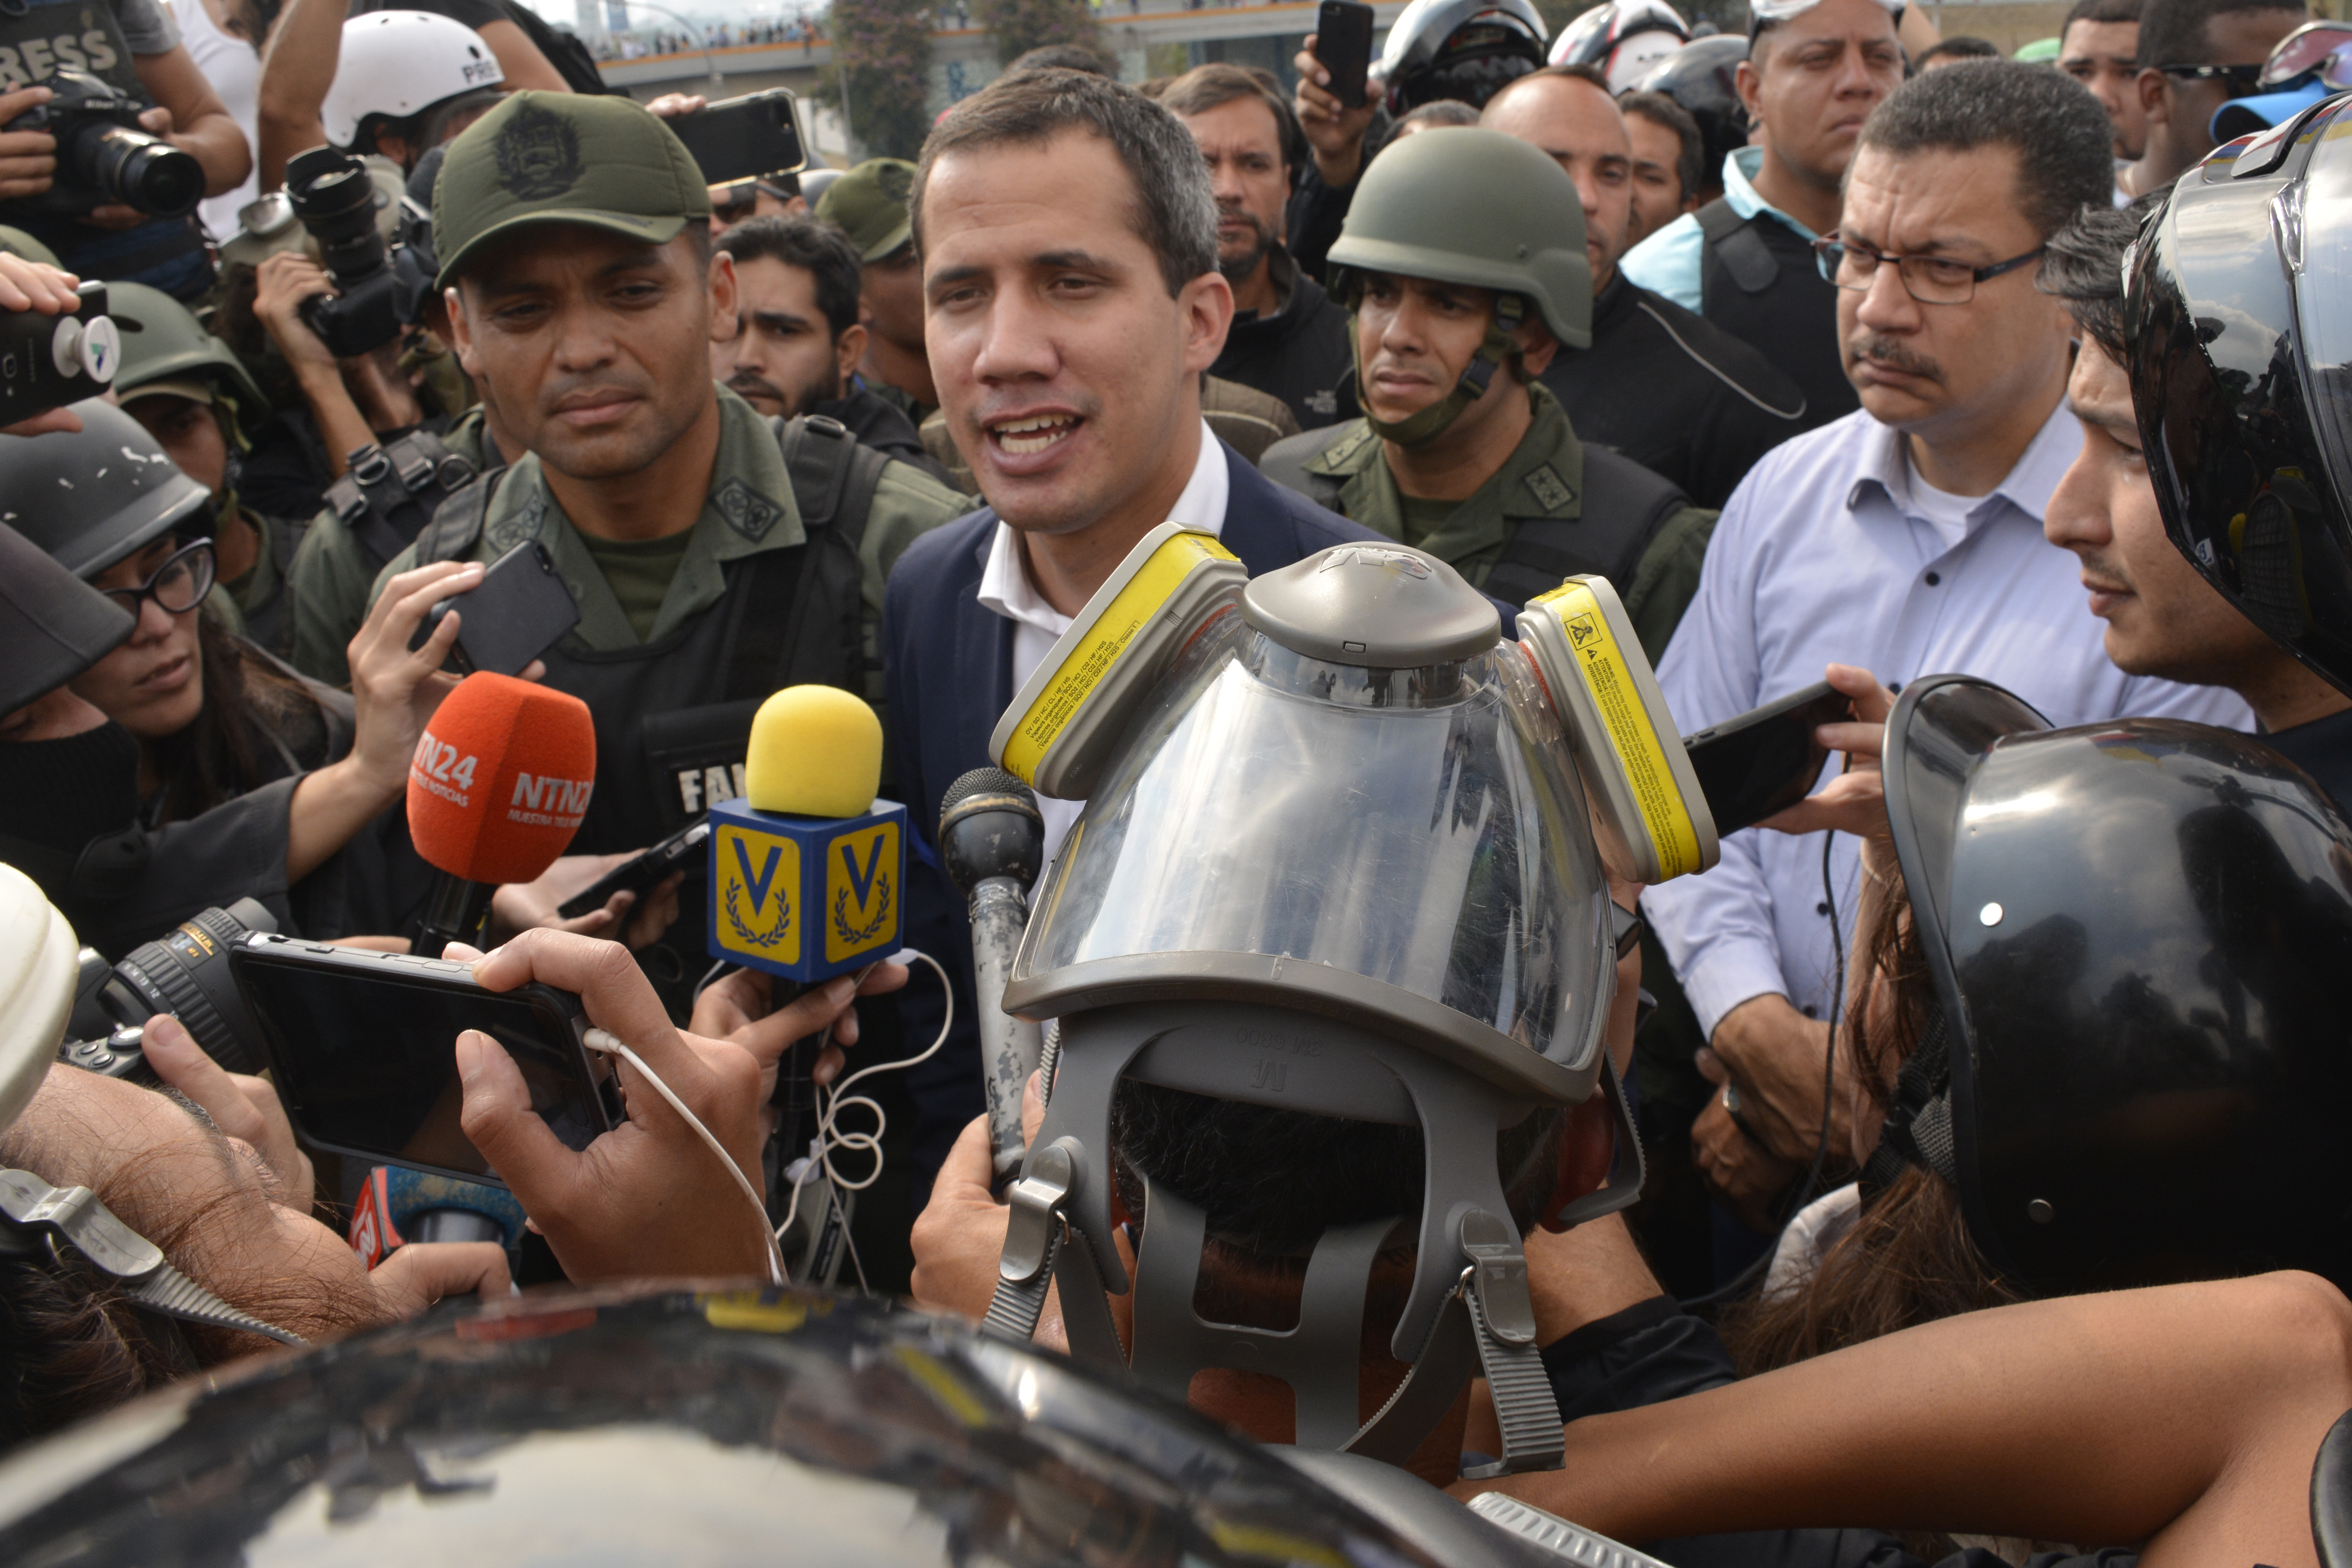 CARACAS, VENEZUELA - APRIL 30: Venezuelan opposition leader Juan Guaidó, recognized by many members of the international community as the country's rightful interim ruler, talks to media out of airforce base La Carlota on April 30, 2019 in Caracas, Venezuela. Through a live broadcast via social media, Venezuelan opposition leader Juan Guaido called for a military uprising against the government of Nicolás Maduro. He declared to be at the air base of La Carlota and was seen surrounded by soldiers and opposition activist Leopoldo Lopez, who was under house arrest. (Photo by Rafael Briceno/Getty Images)